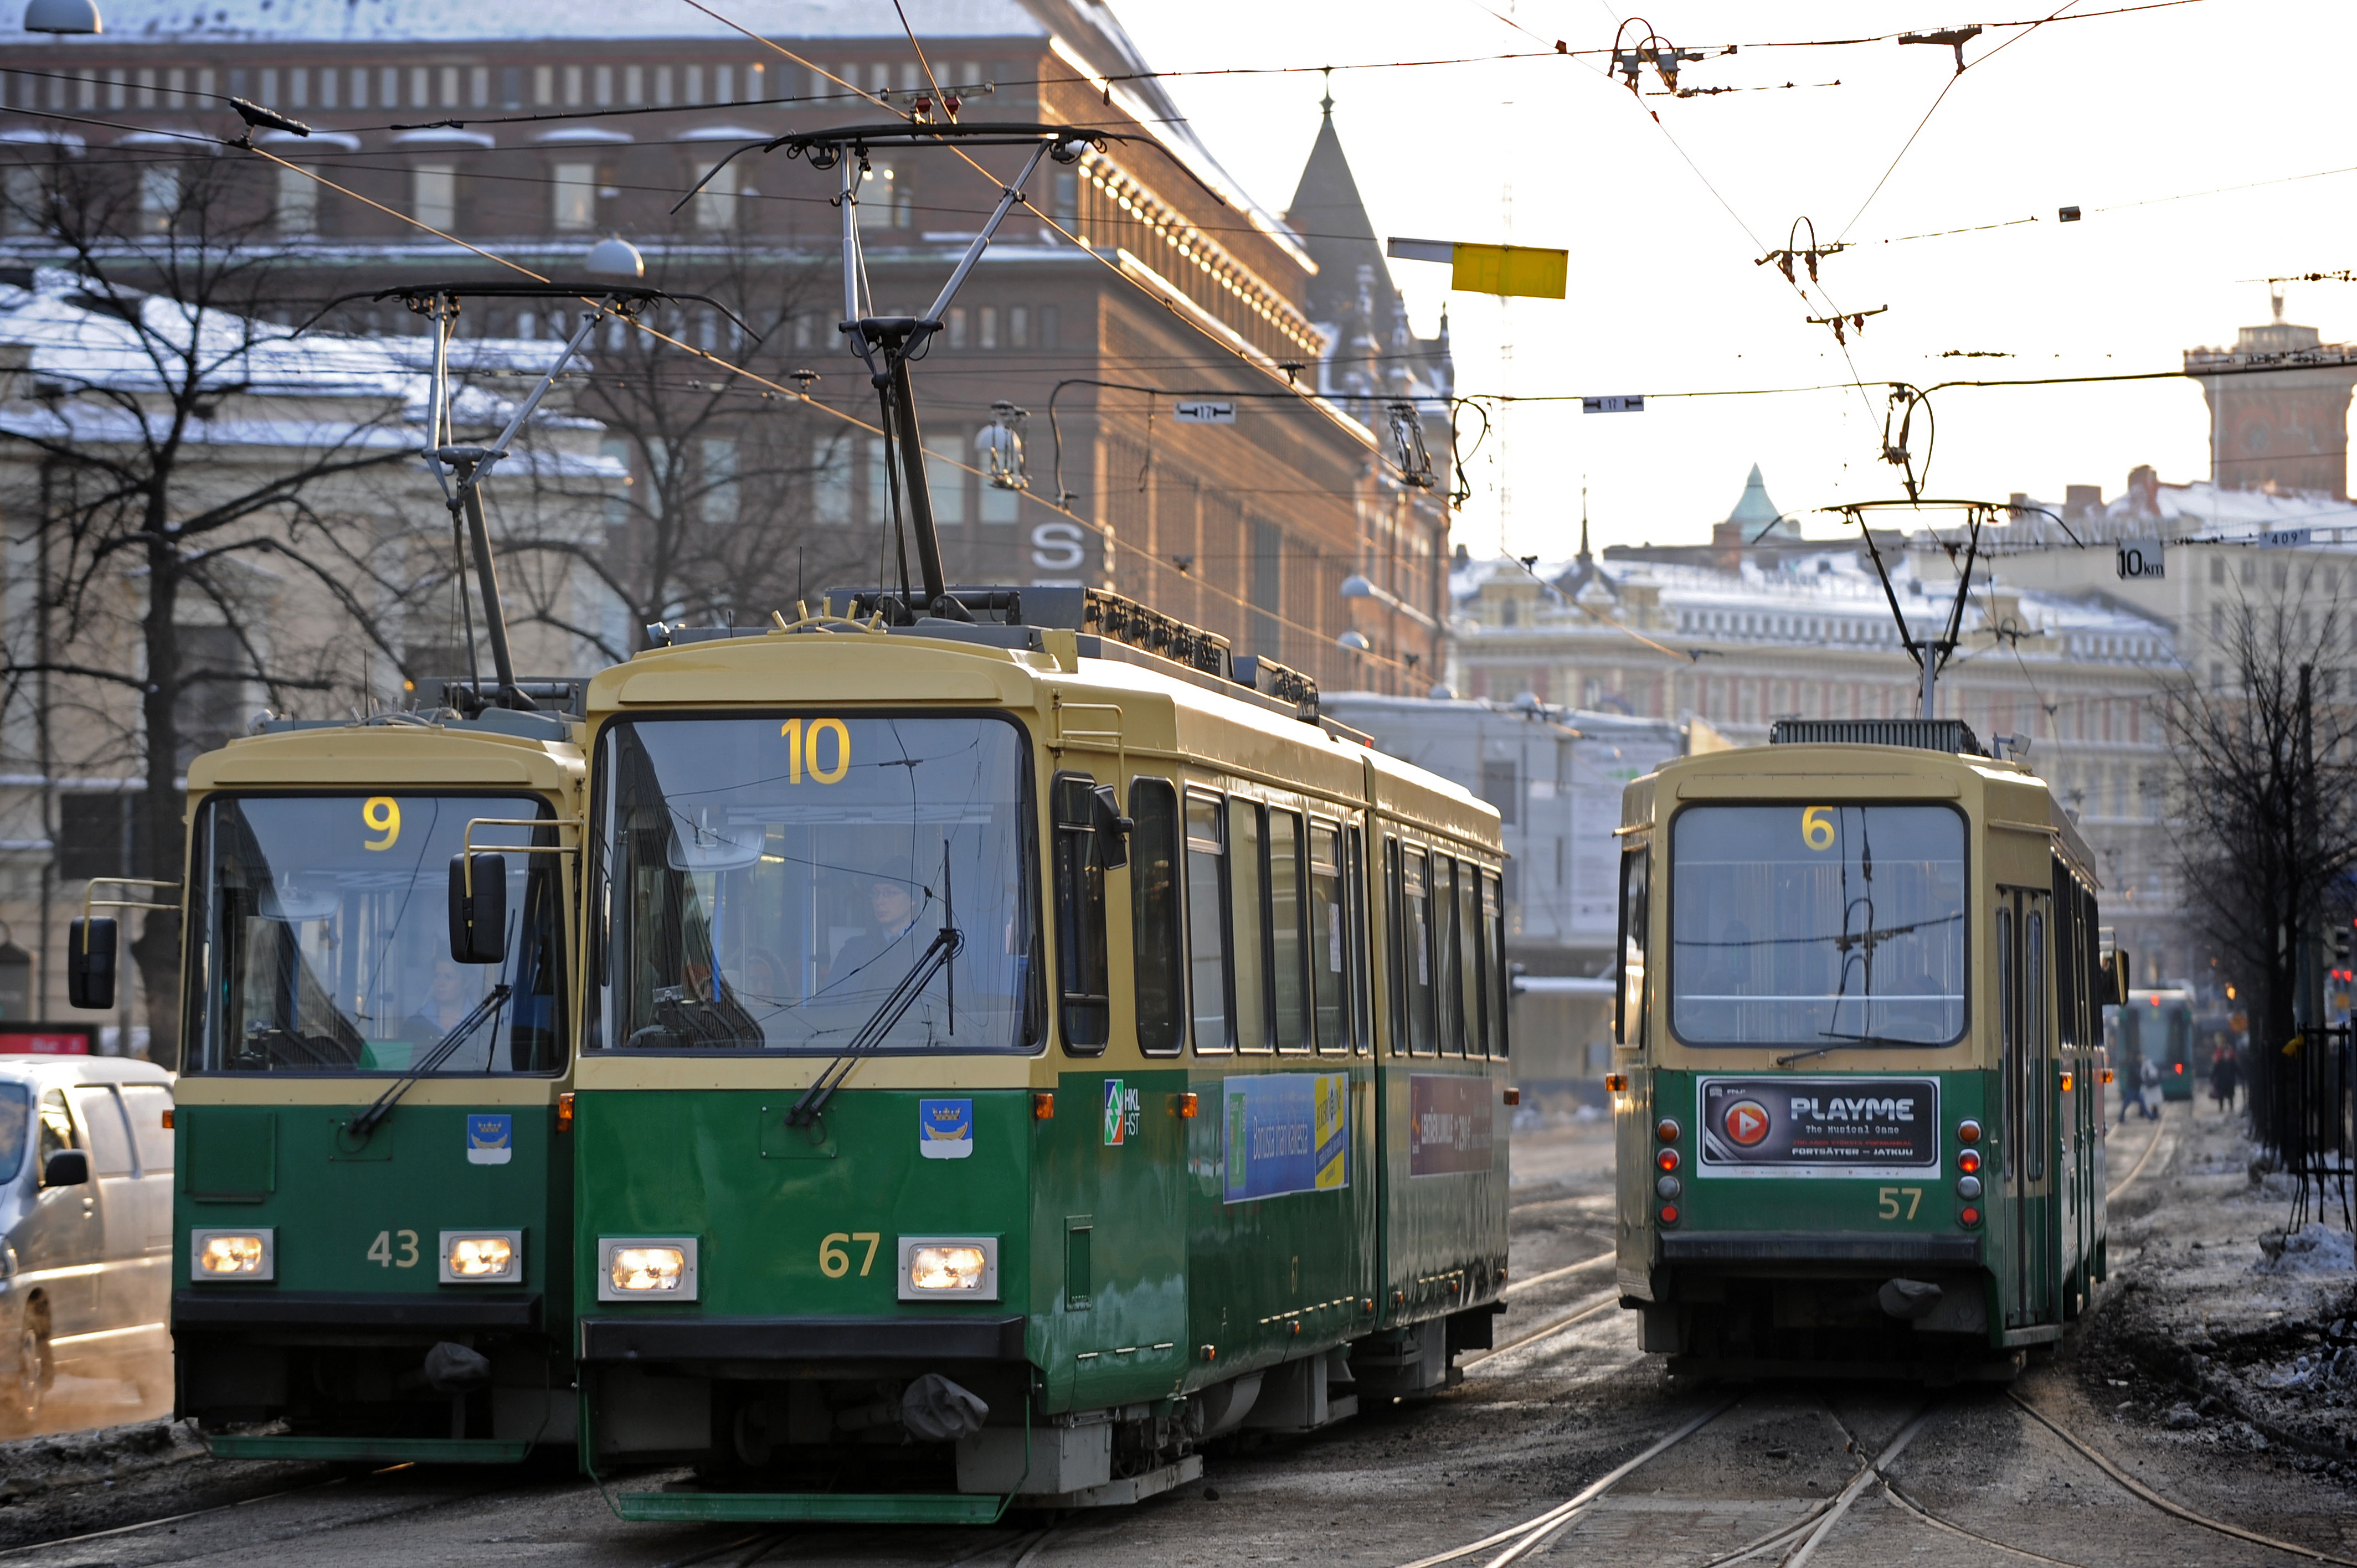 HKL company's trams from line 9, 10 and 6 pass on the main street Mannerheimintie on Jan. 20, 2010, in Helsinki's city center. (Olivier Morin&mdash;AFP/Getty Images)